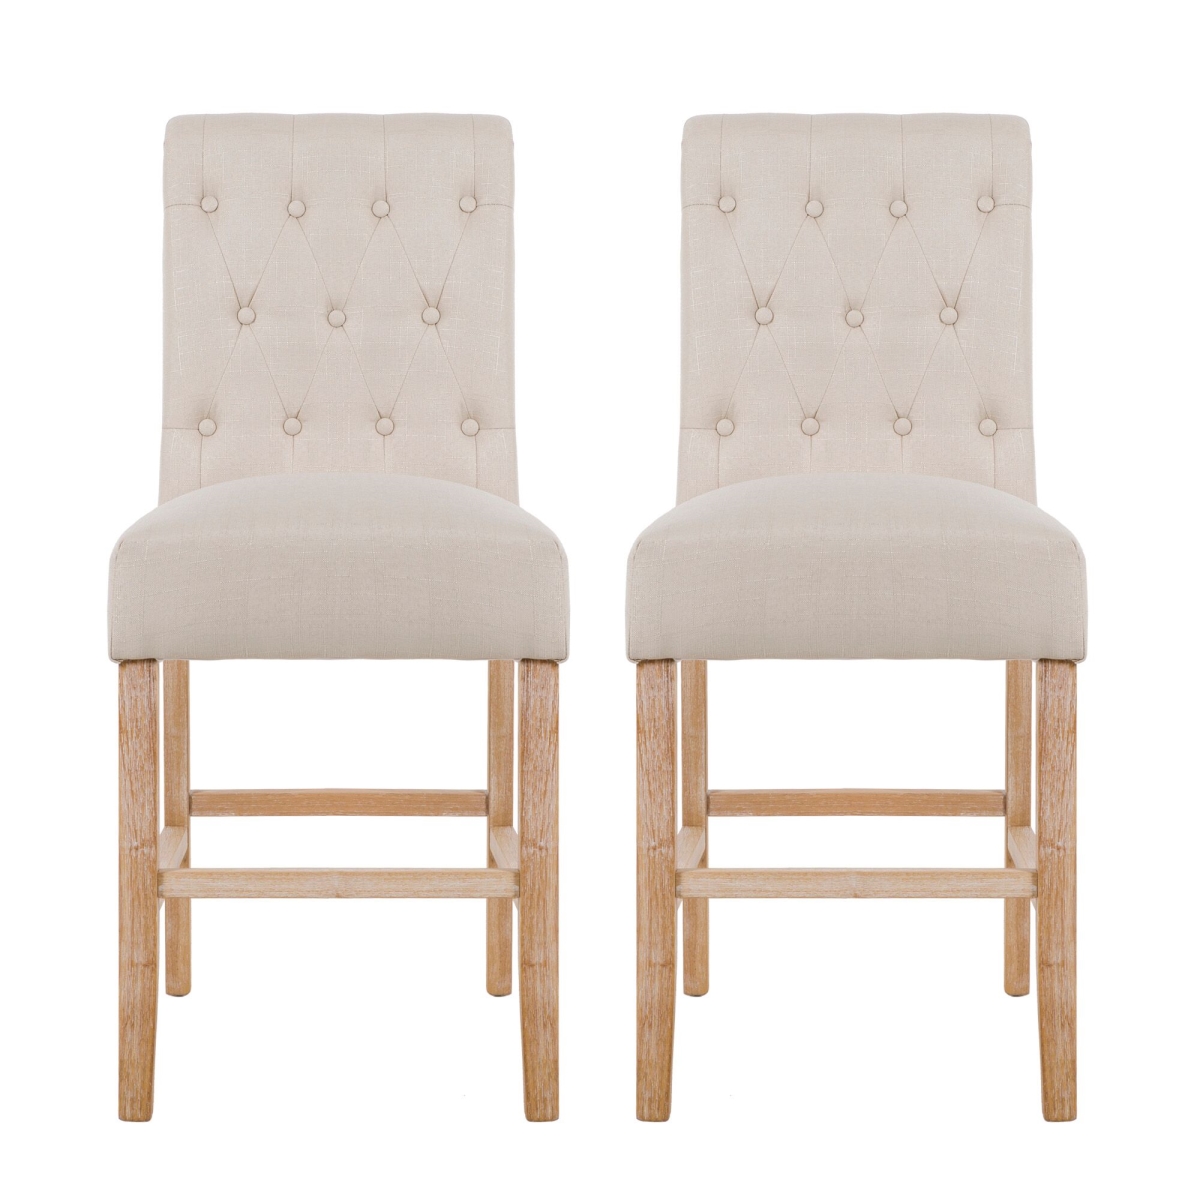 Myrh7033by-tan Counter Height Button Tufting Fabric Upholstered Dining Chair, Tan - Set Of 2